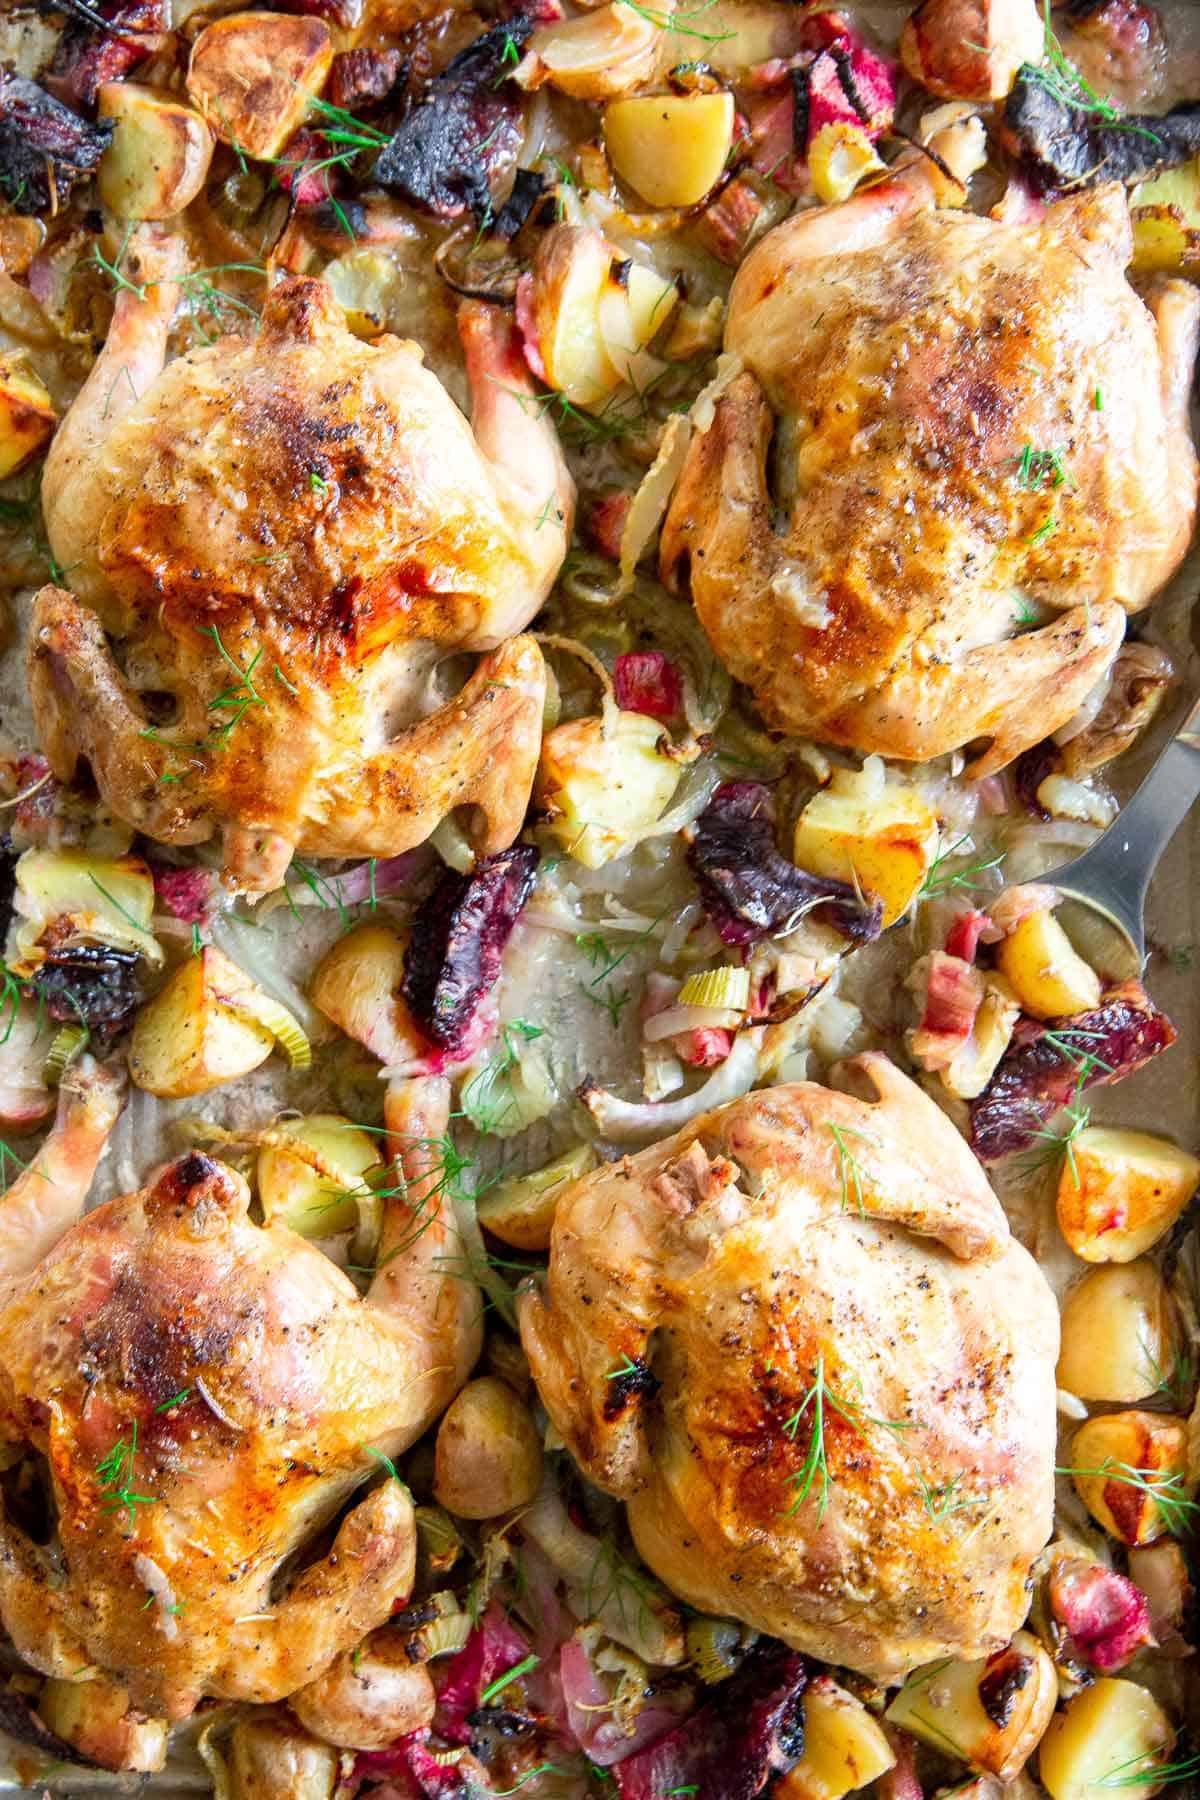 Looking for a spring dinner that's impressive, packed with flavor yet super simple? Try this sheet pan Cornish Game Hen recipe.